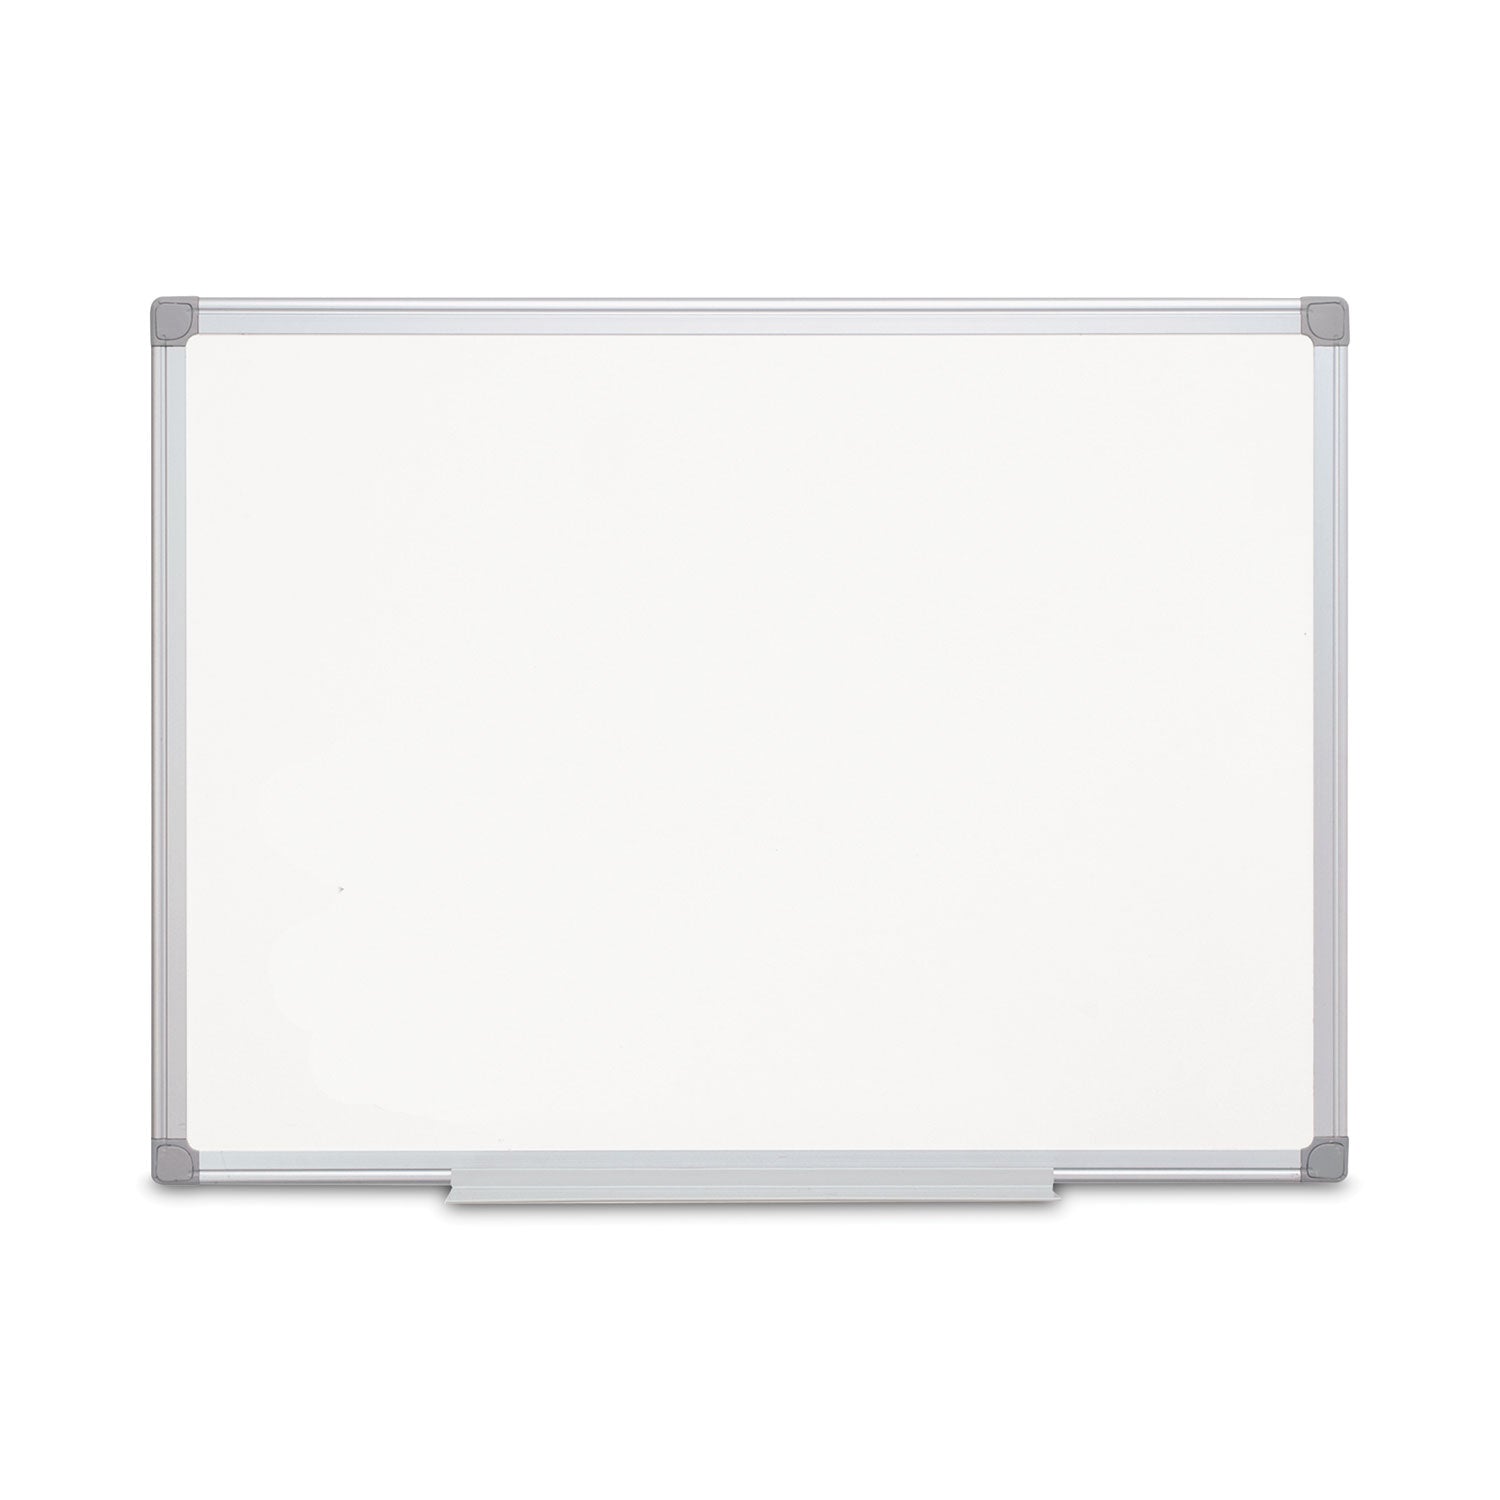 earth-silver-easy-clean-dry-erase-board-36-x-24-white-surface-silver-aluminum-frame_bvccr0620790 - 1